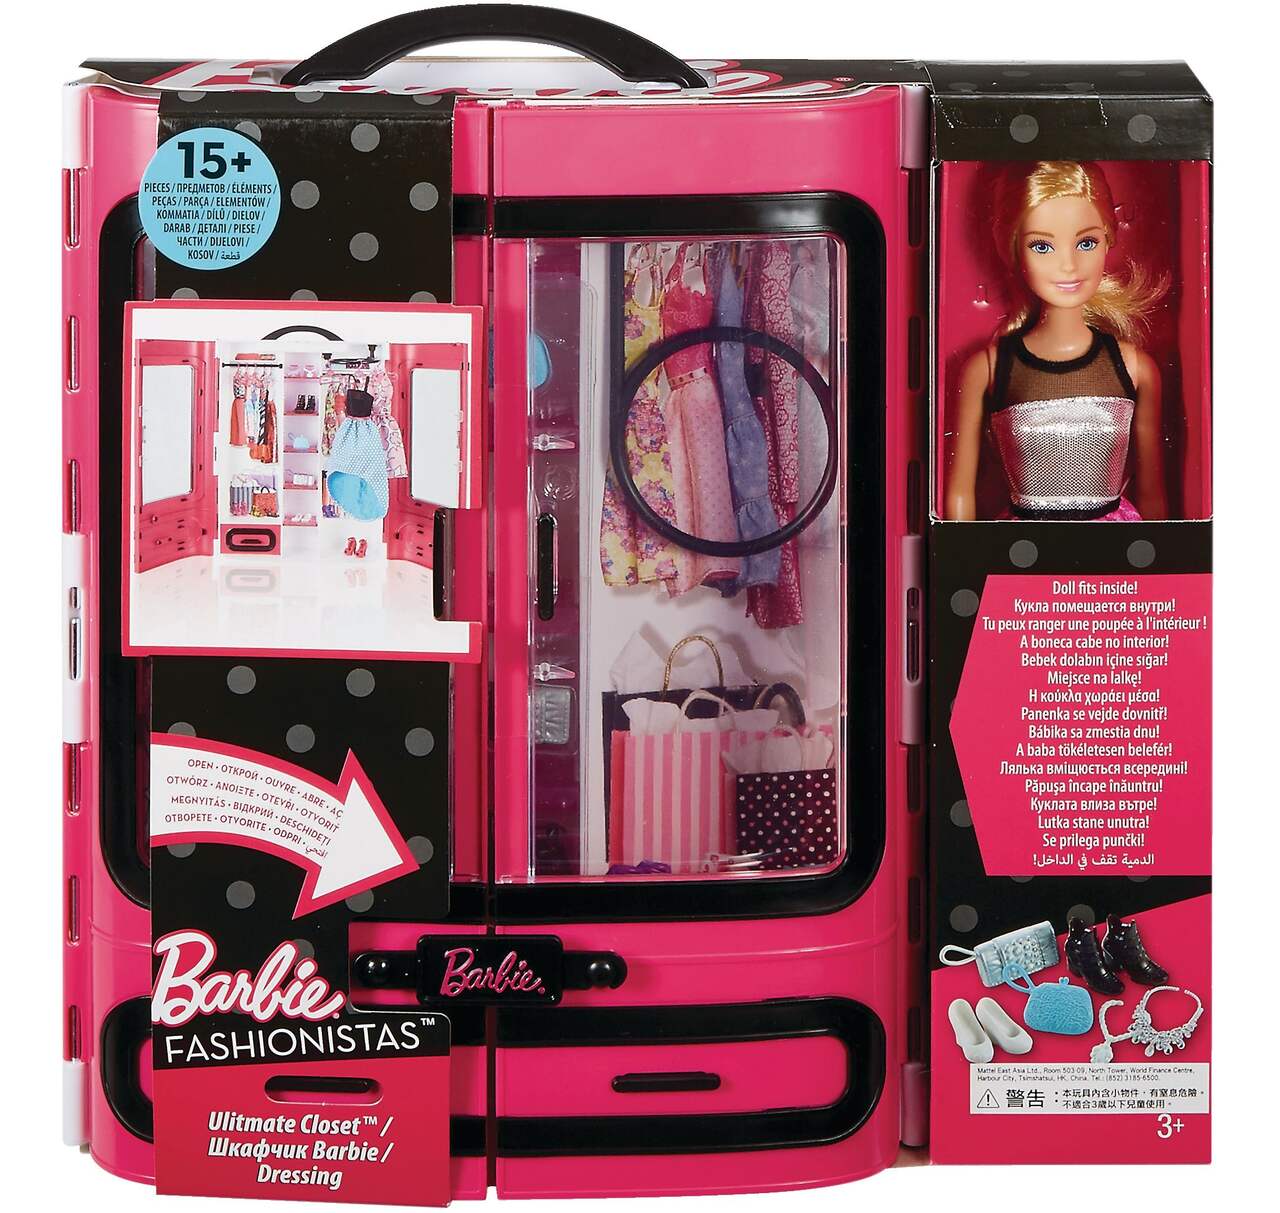 Barbie Fashionistas Ultimate Closet Portable Fashion Toy with Doll